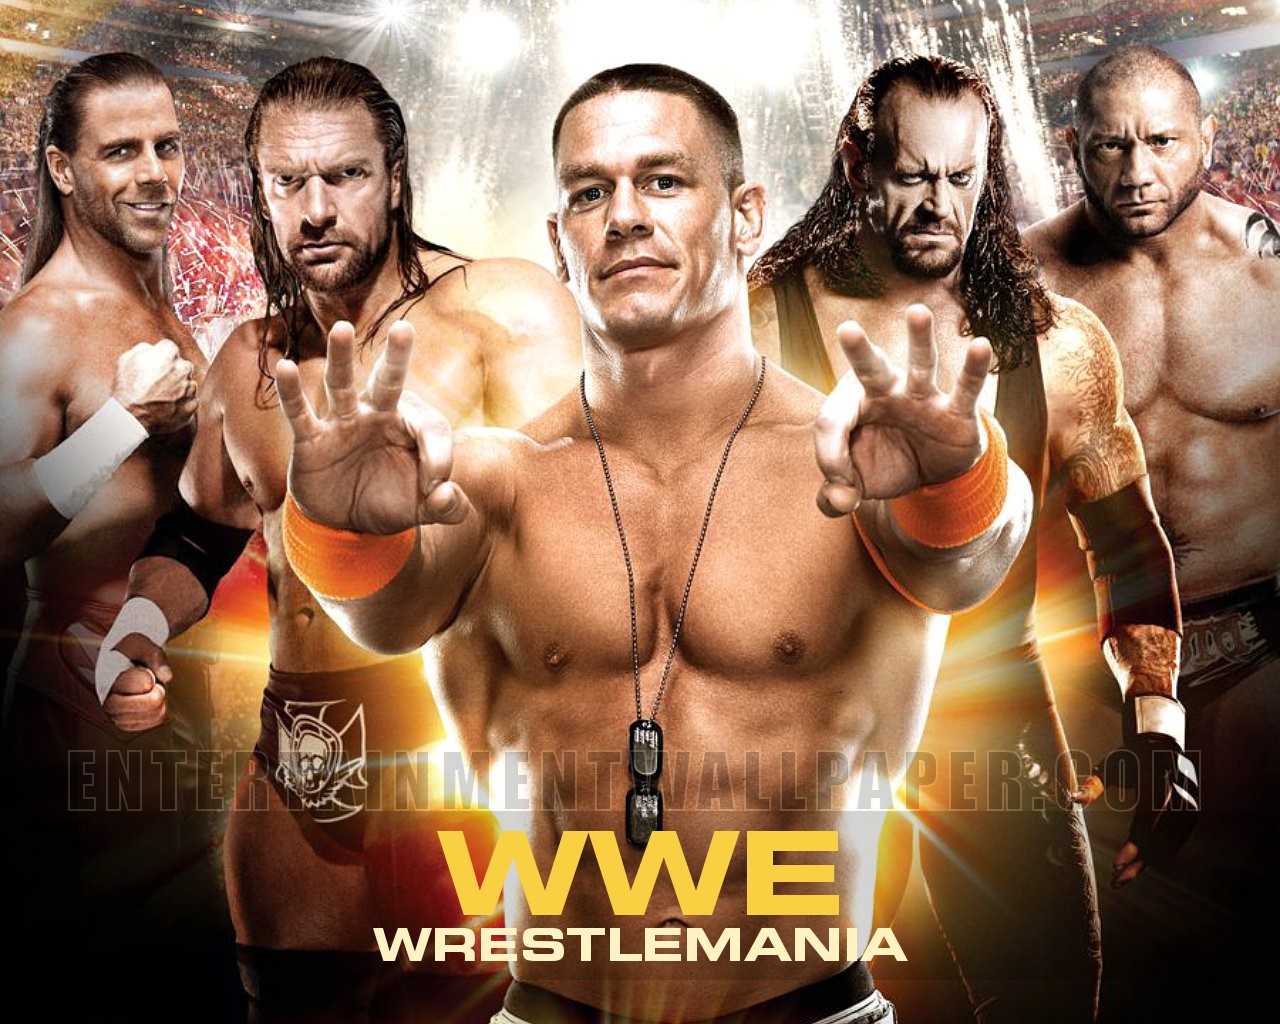 Wwe Image Wrestlemania HD Wallpaper And Background Photos